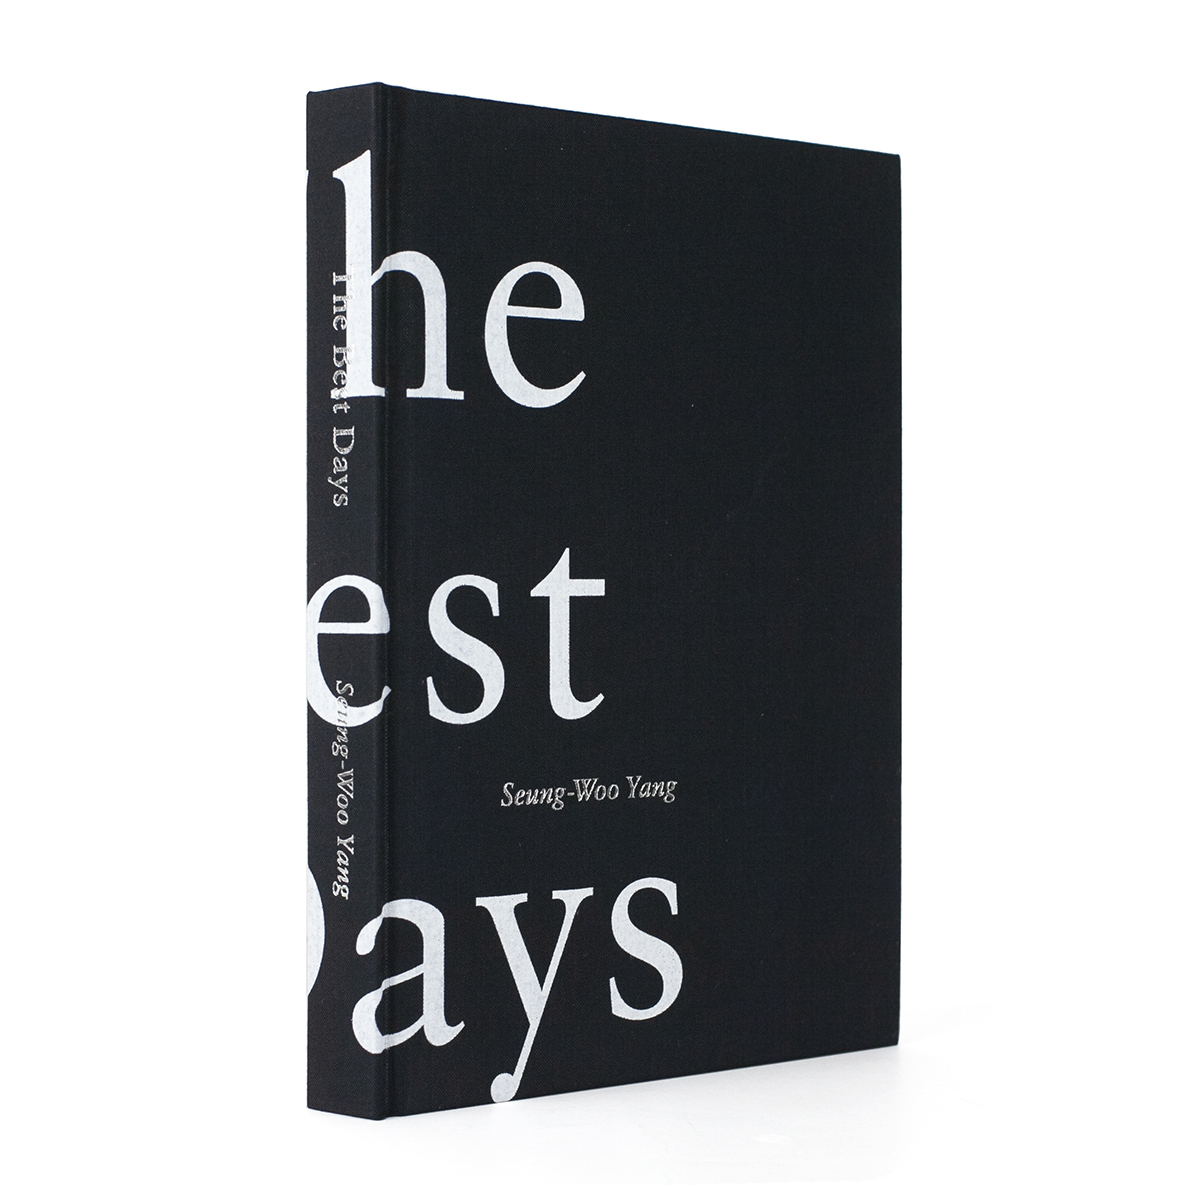 The Best Days (New Edition) - Yang Seung-Woo